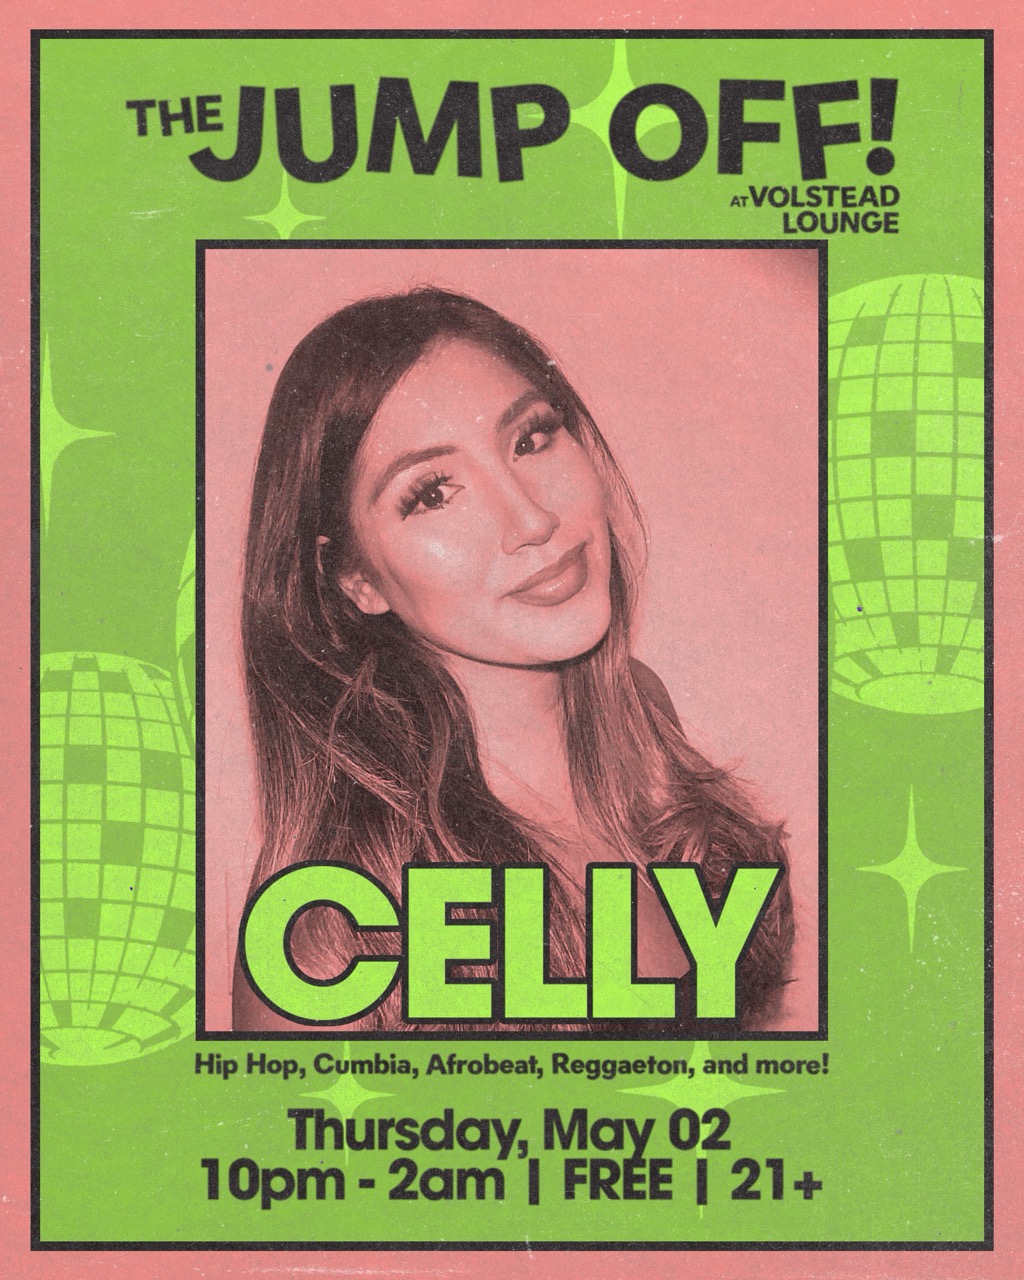 The Jump Off! With Celly @ Volstead Lounge